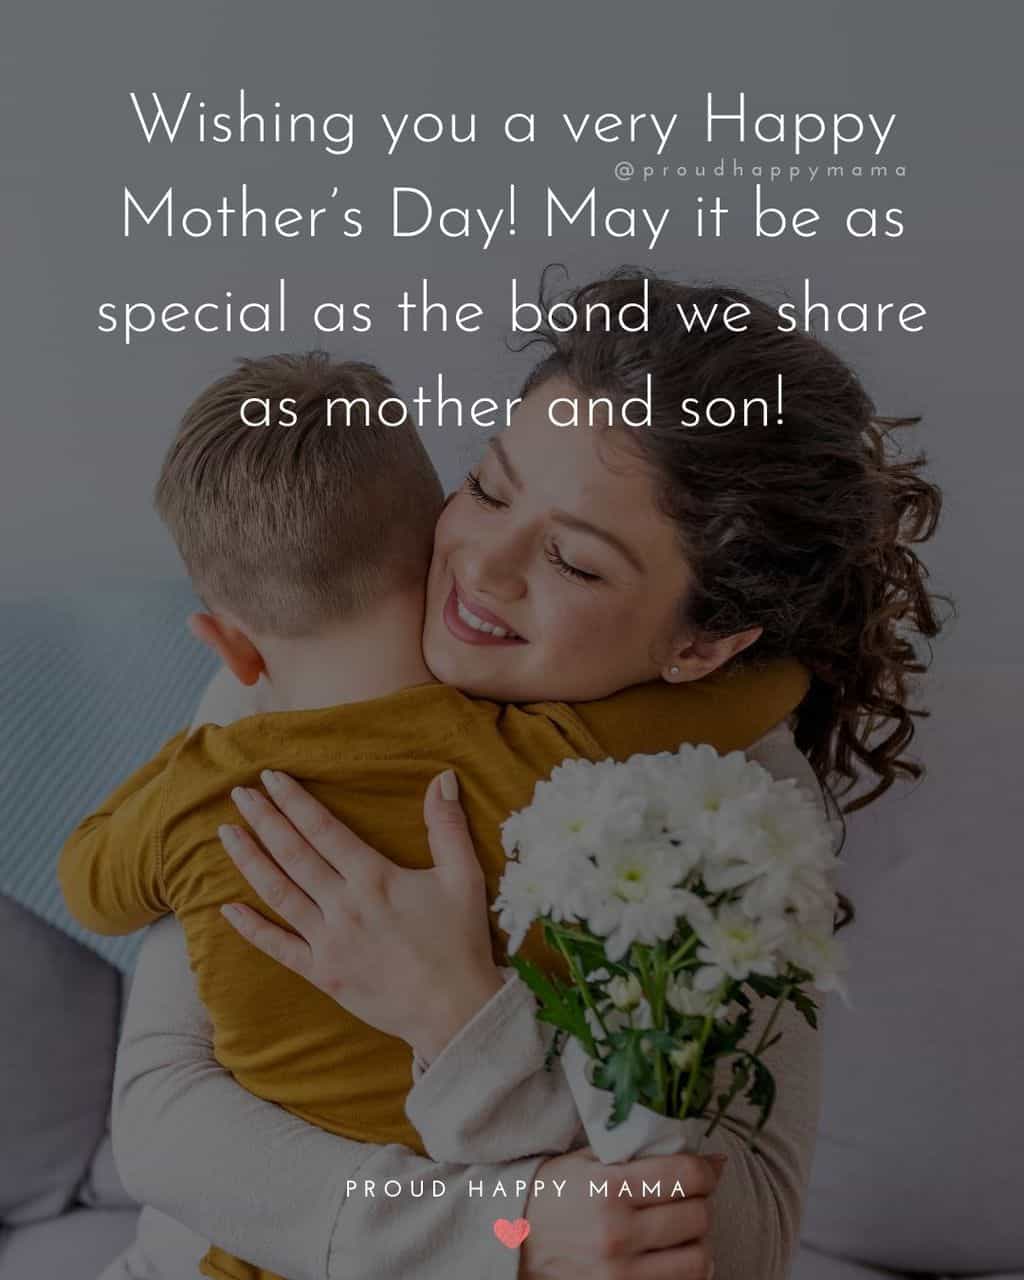 Happy Mothers Day Quotes From Son - Wishing you a very Happy Mother’s Day! May it be as special as the bond we share 